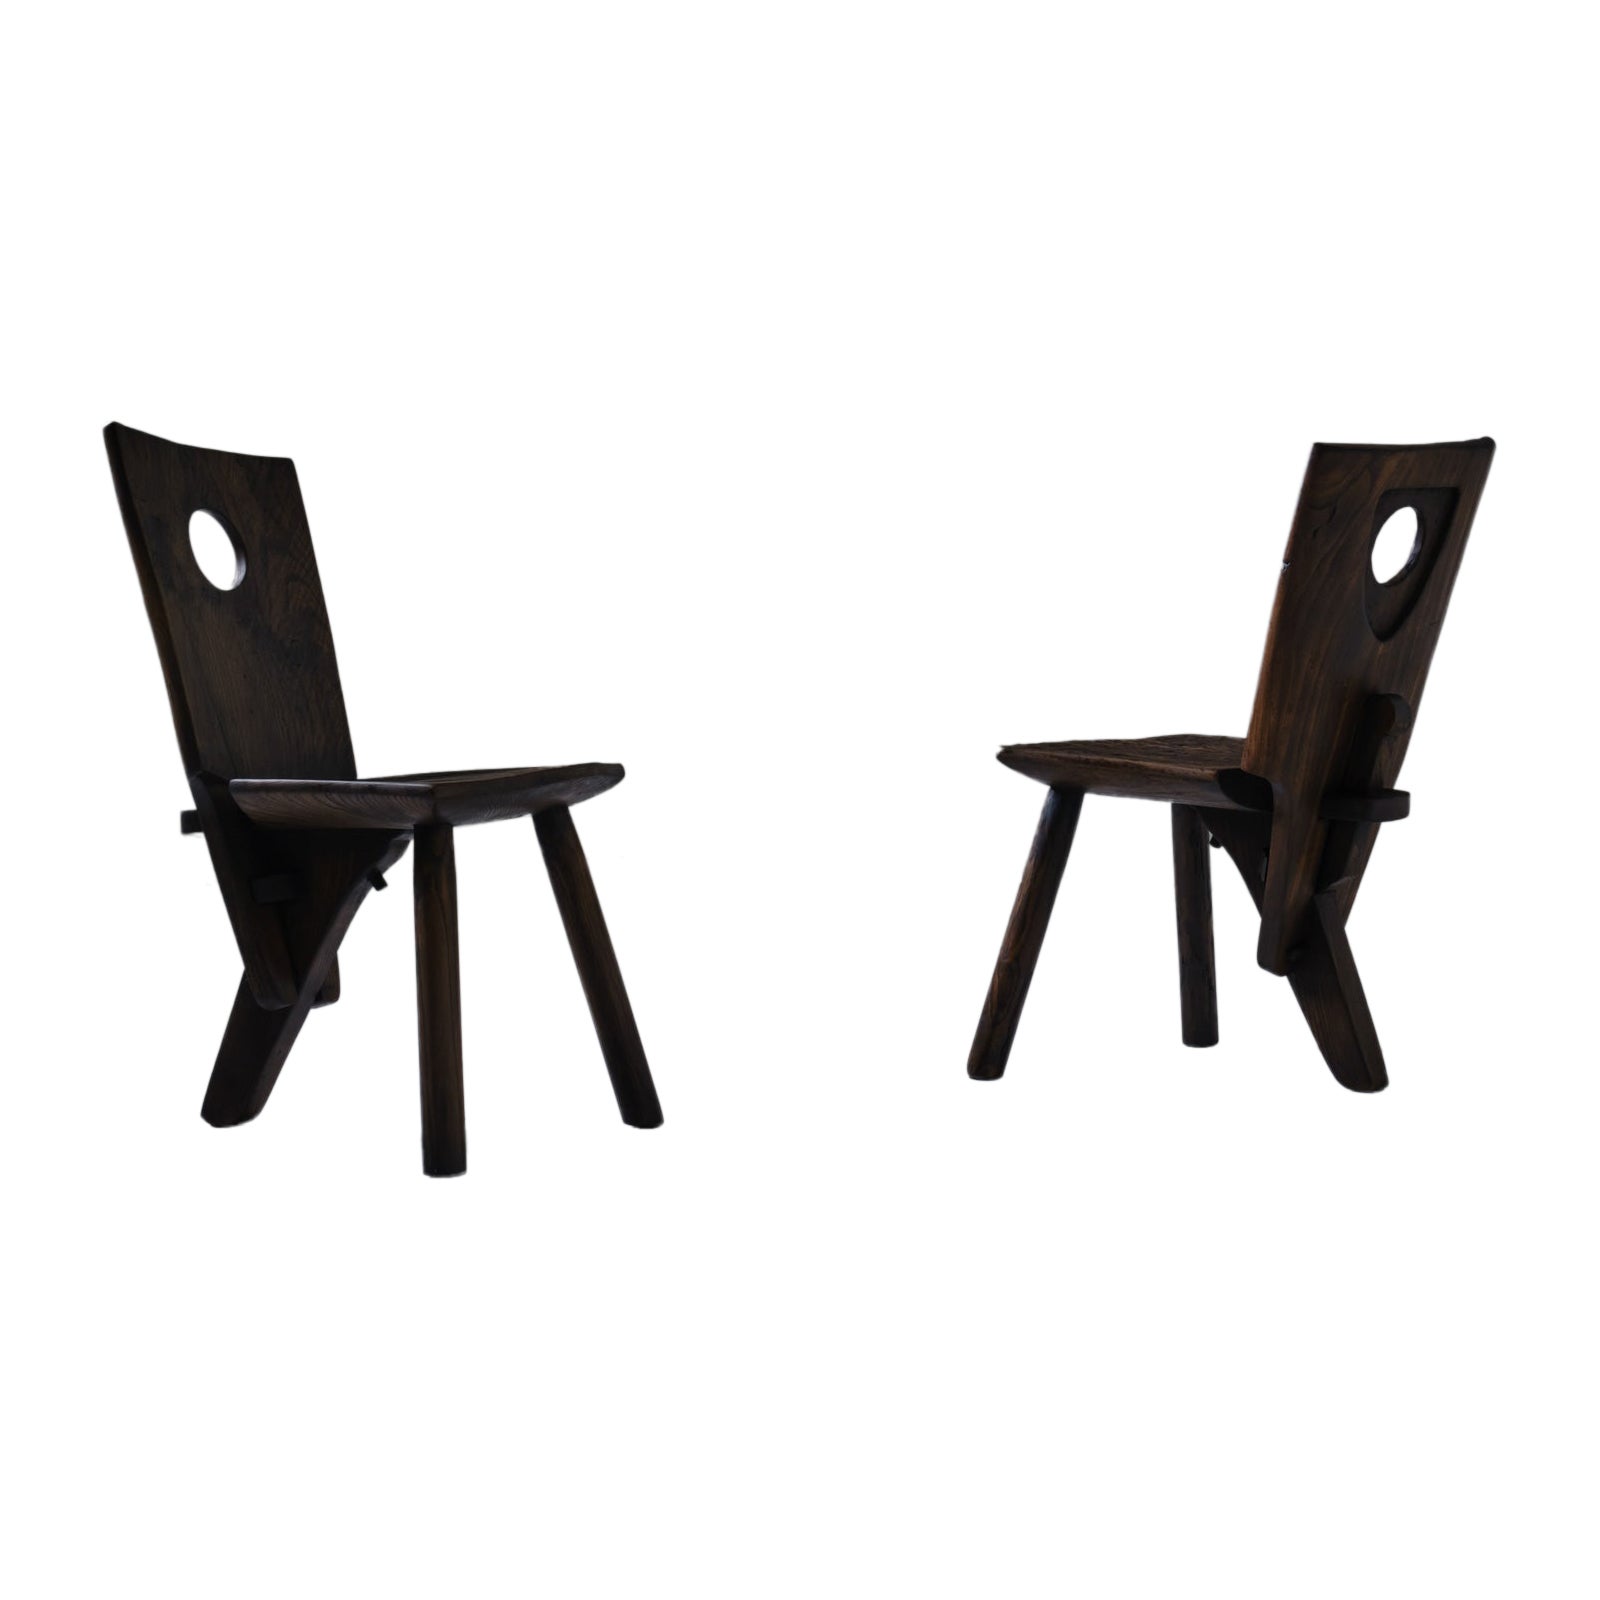 French Art Populaire Tripod Chairs, Set of Two